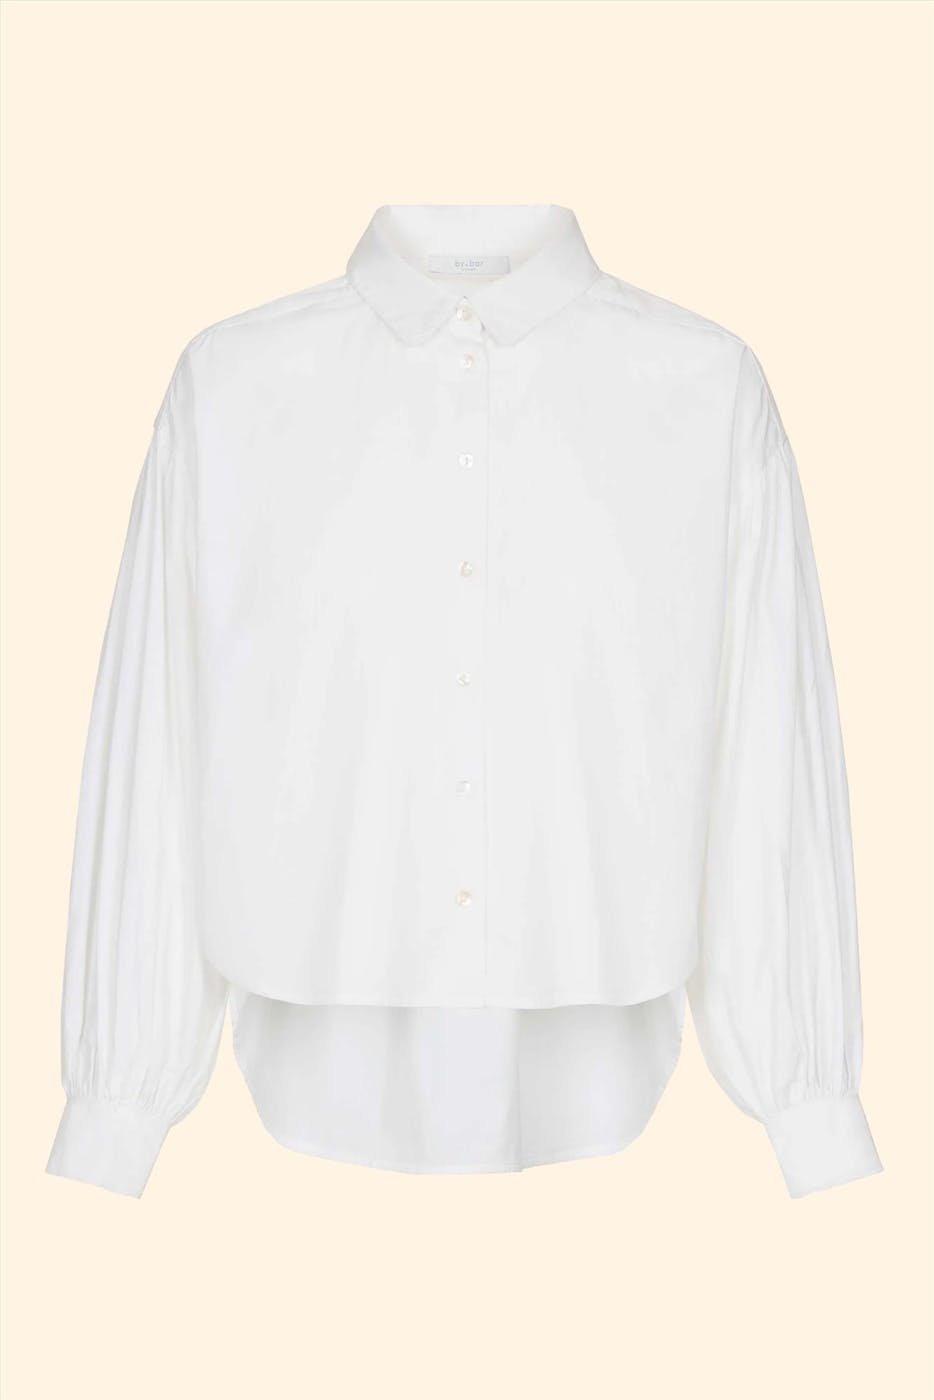 BY BAR - Witte Sarah blouse